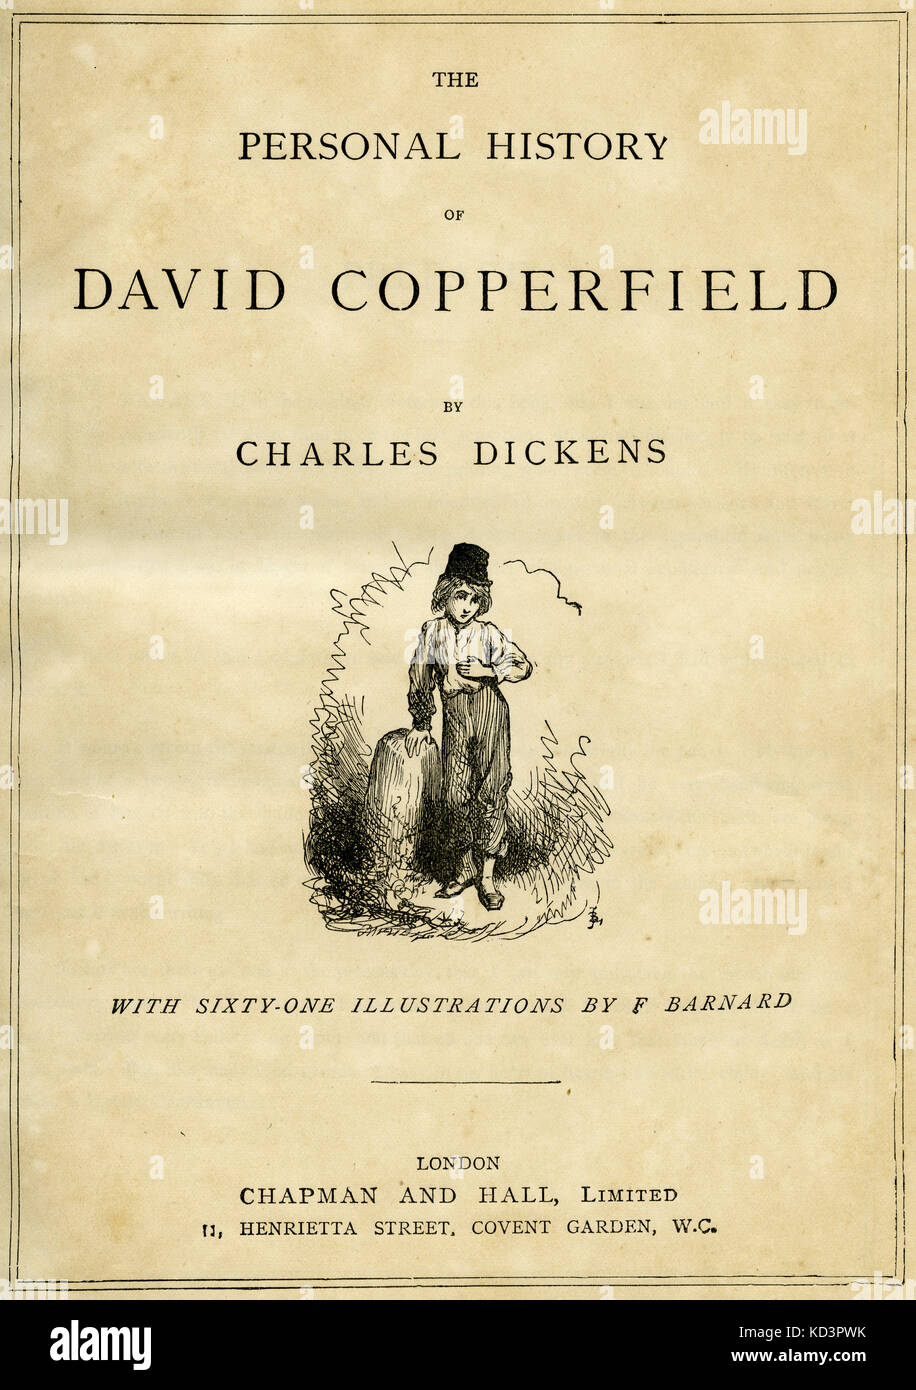 The Personal History of David Copperfield by Charles Dickens Title page -   English novelist, 7 February 1812 - 9 June 1870. Illustration by Frederick (Fred) Barnard .  London . Chapman and Hall. Stock Photo